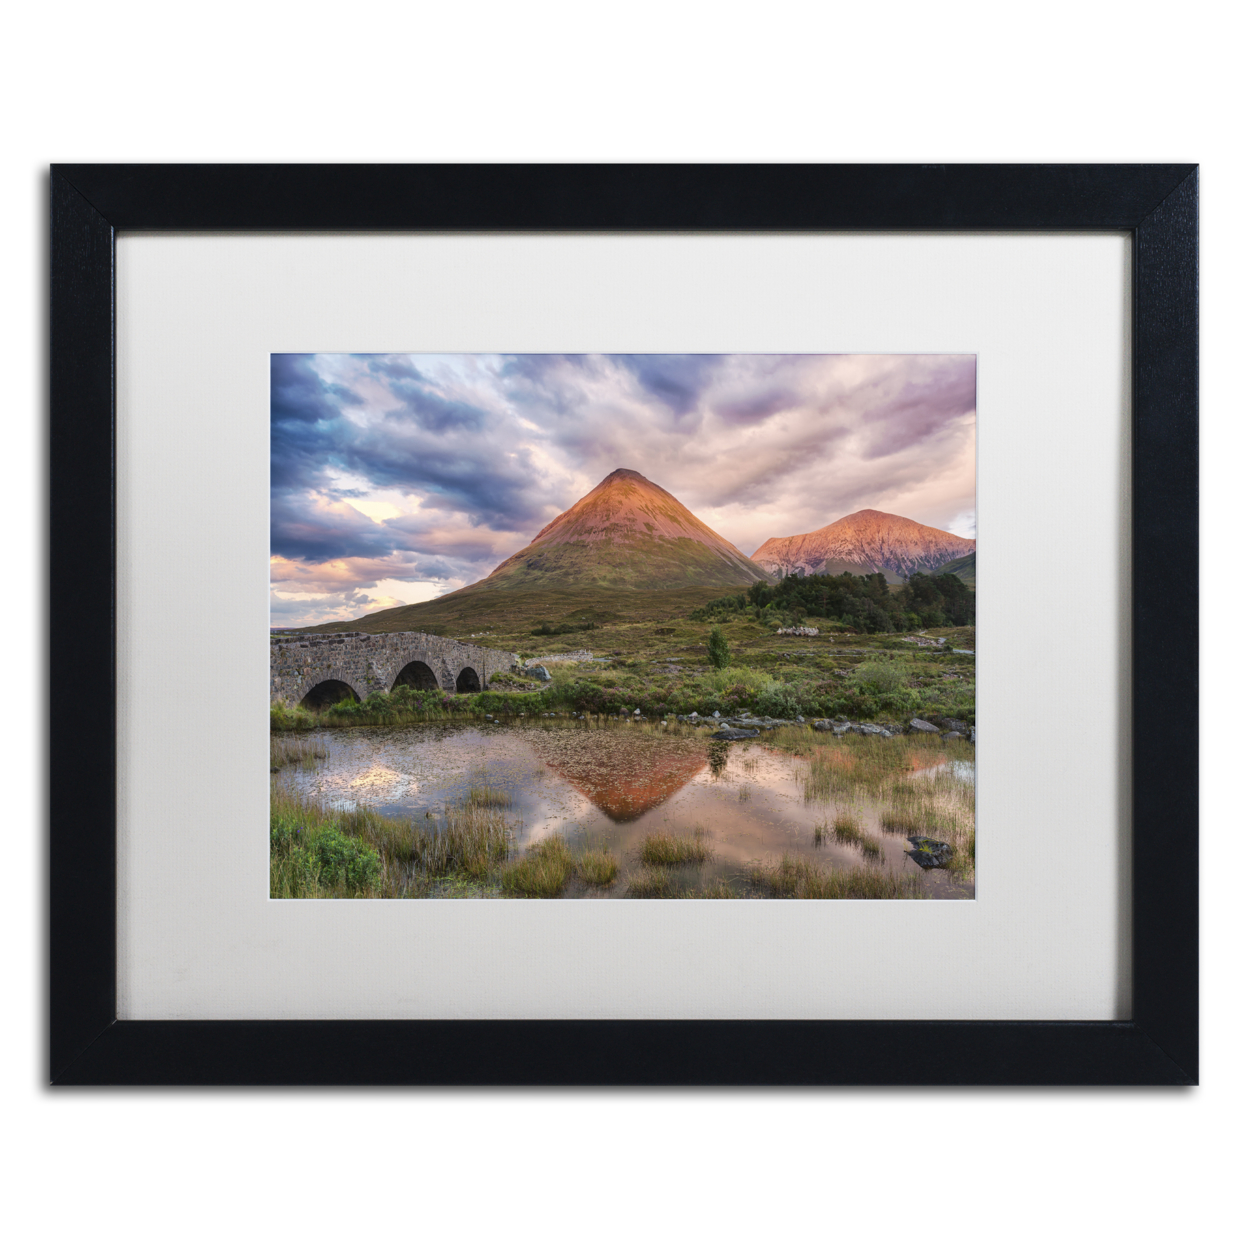 Michael Blanchette Photography 'Glamaig Sunset' Black Wooden Framed Art 18 X 22 Inches